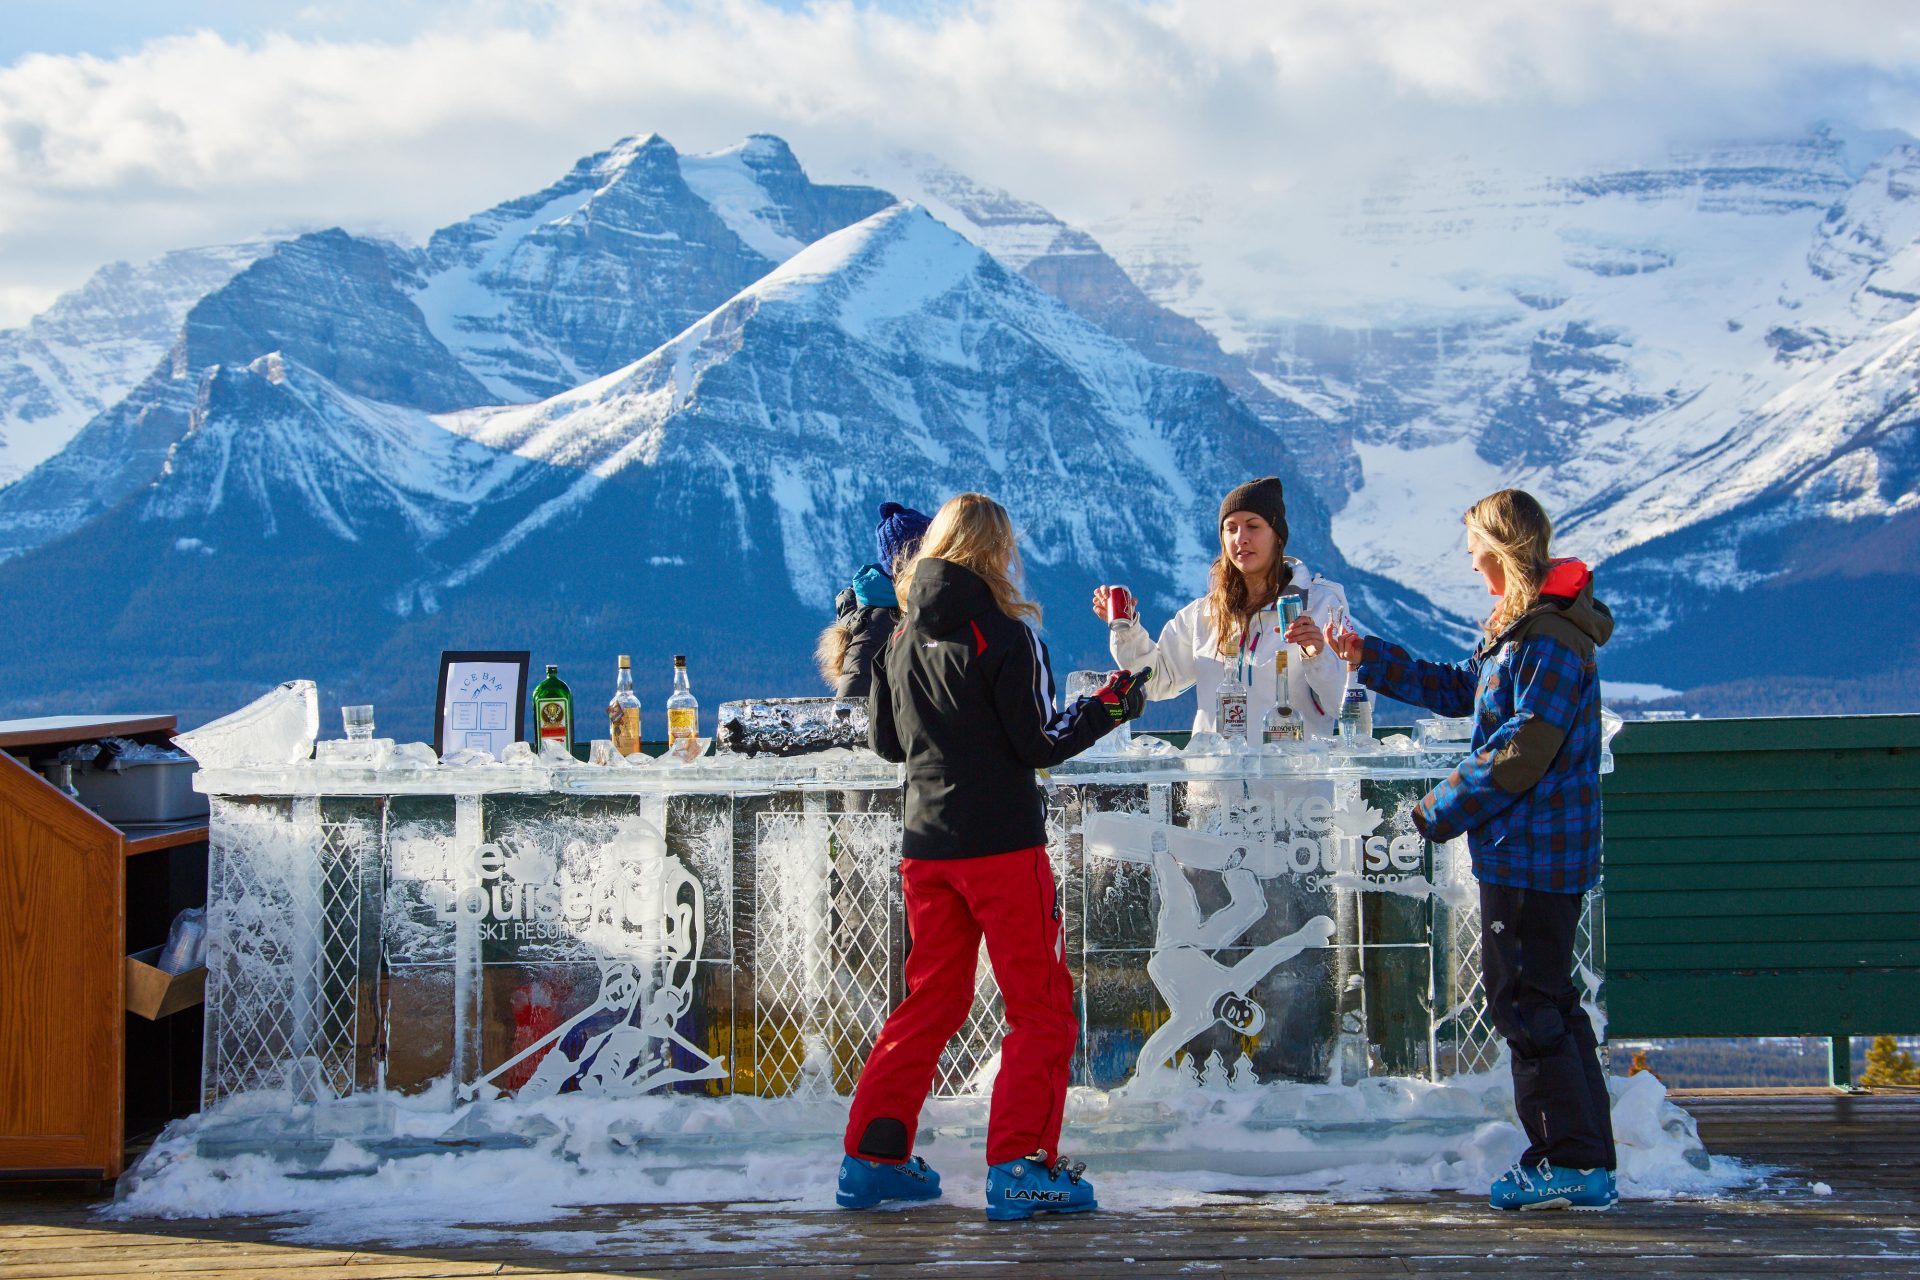 Female skiers enjoying a drink. Photo: Photo by EyesWideOpen/Getty Images.